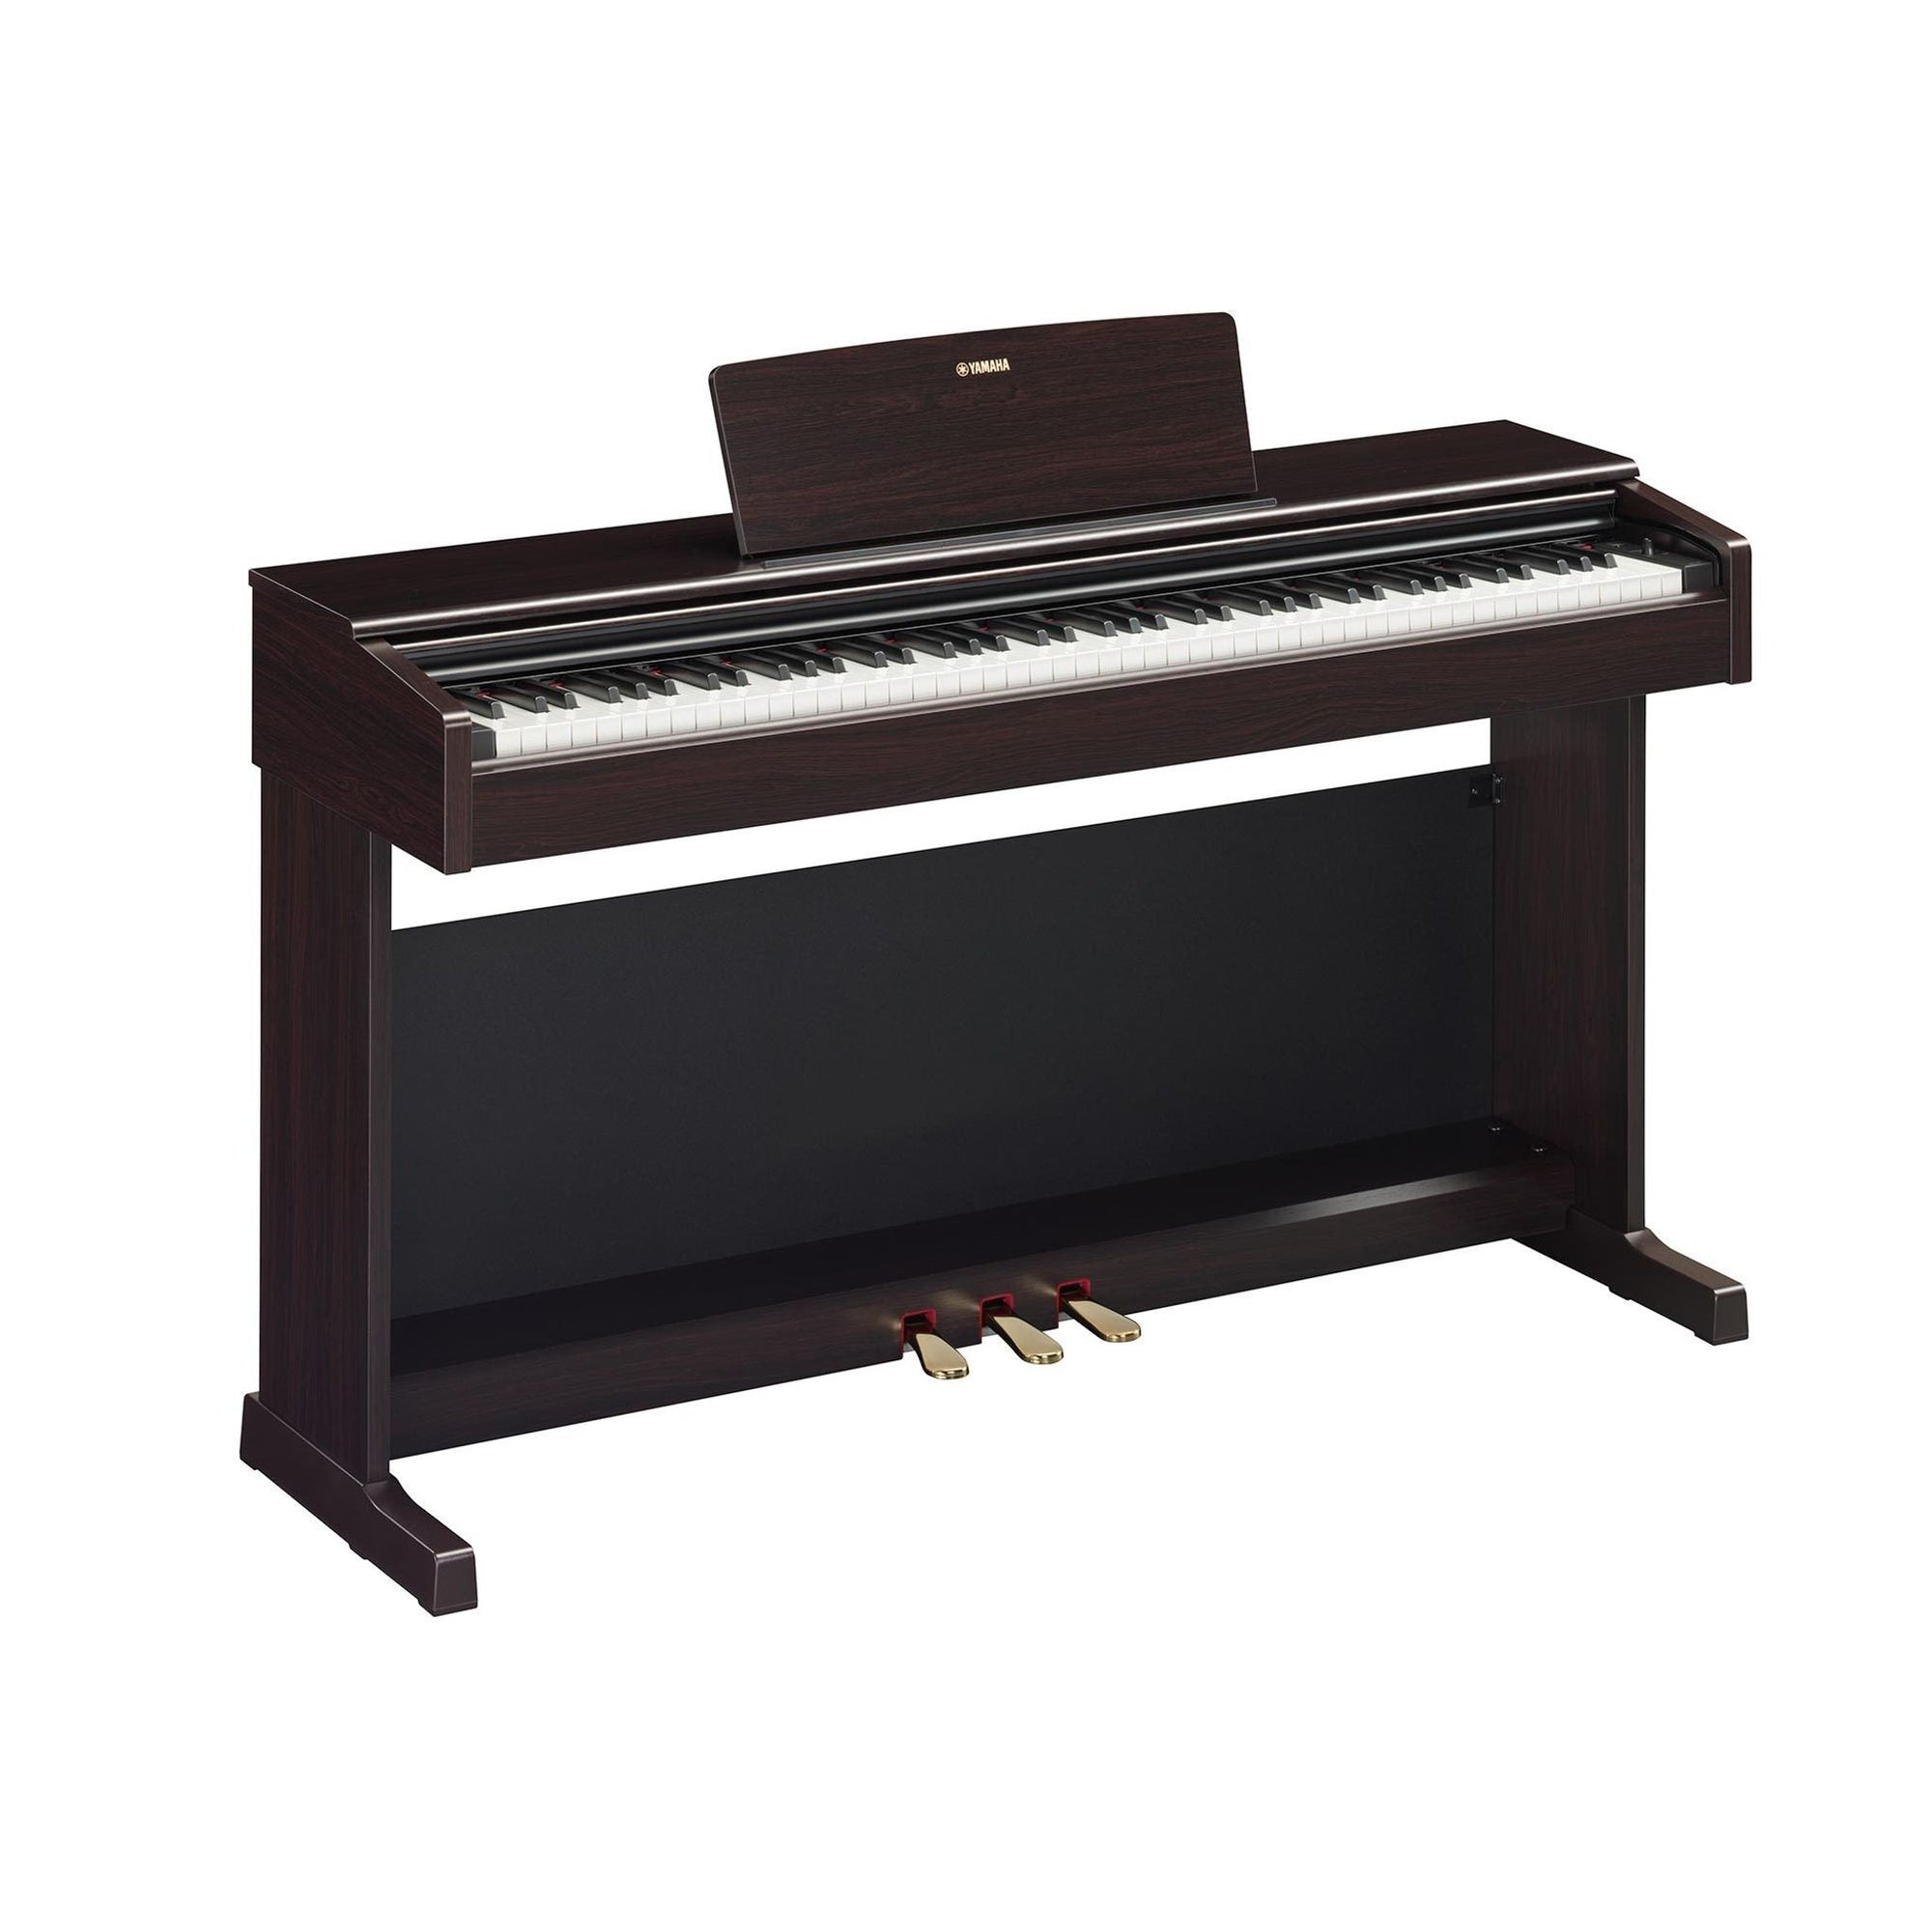 The Yamaha YDP145 Arius Digital Piano offers luxurious tone and expressive ease of playing stays true to the basics of a real piano. It almost plays itself, releasing the sound and music you have within. Start your day with music and a huge smile on your face. The ARIUS piano makes you want to play more and more.